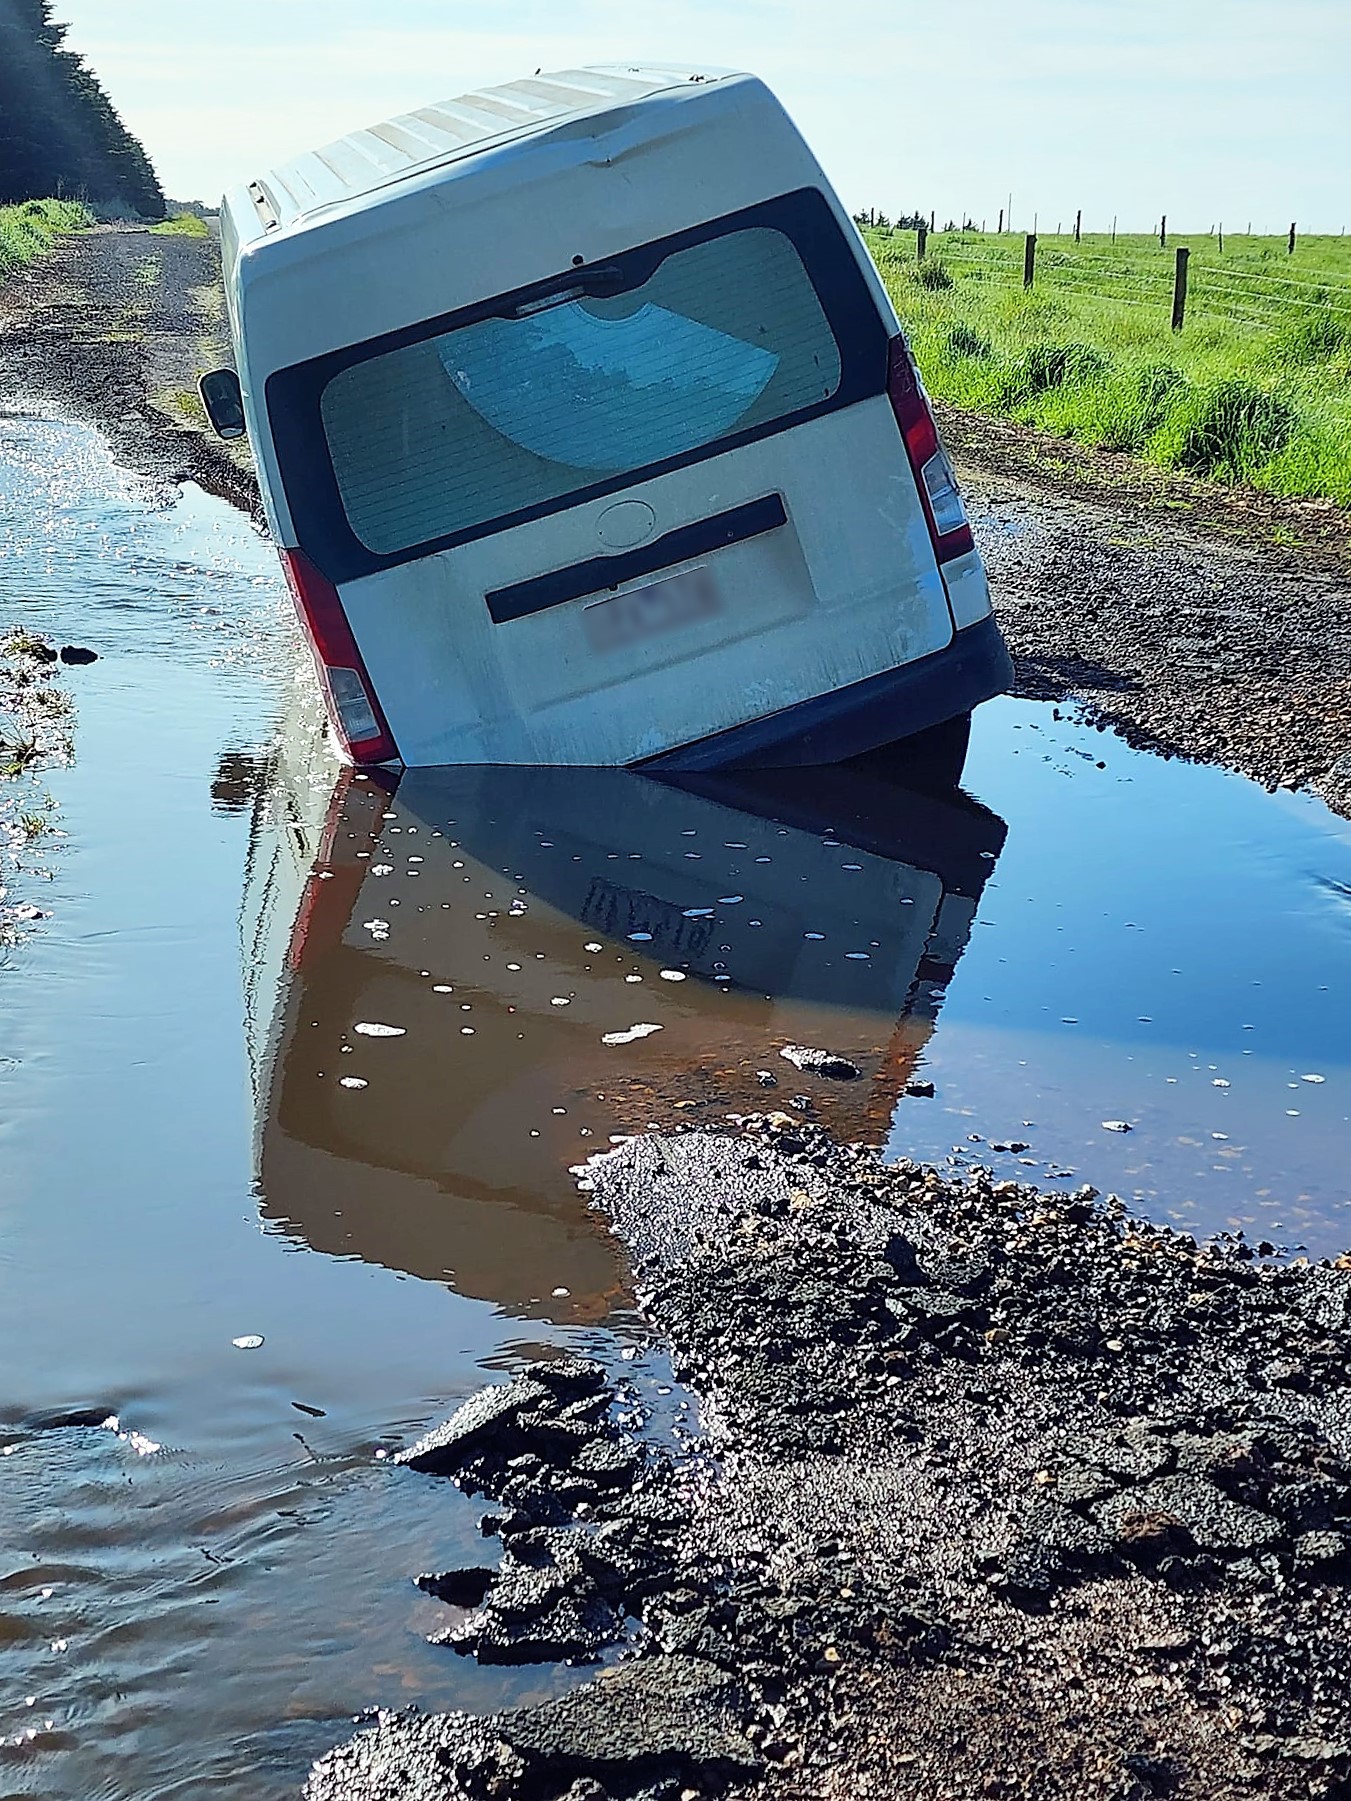 A van became is stranded in floodwater next to a field.